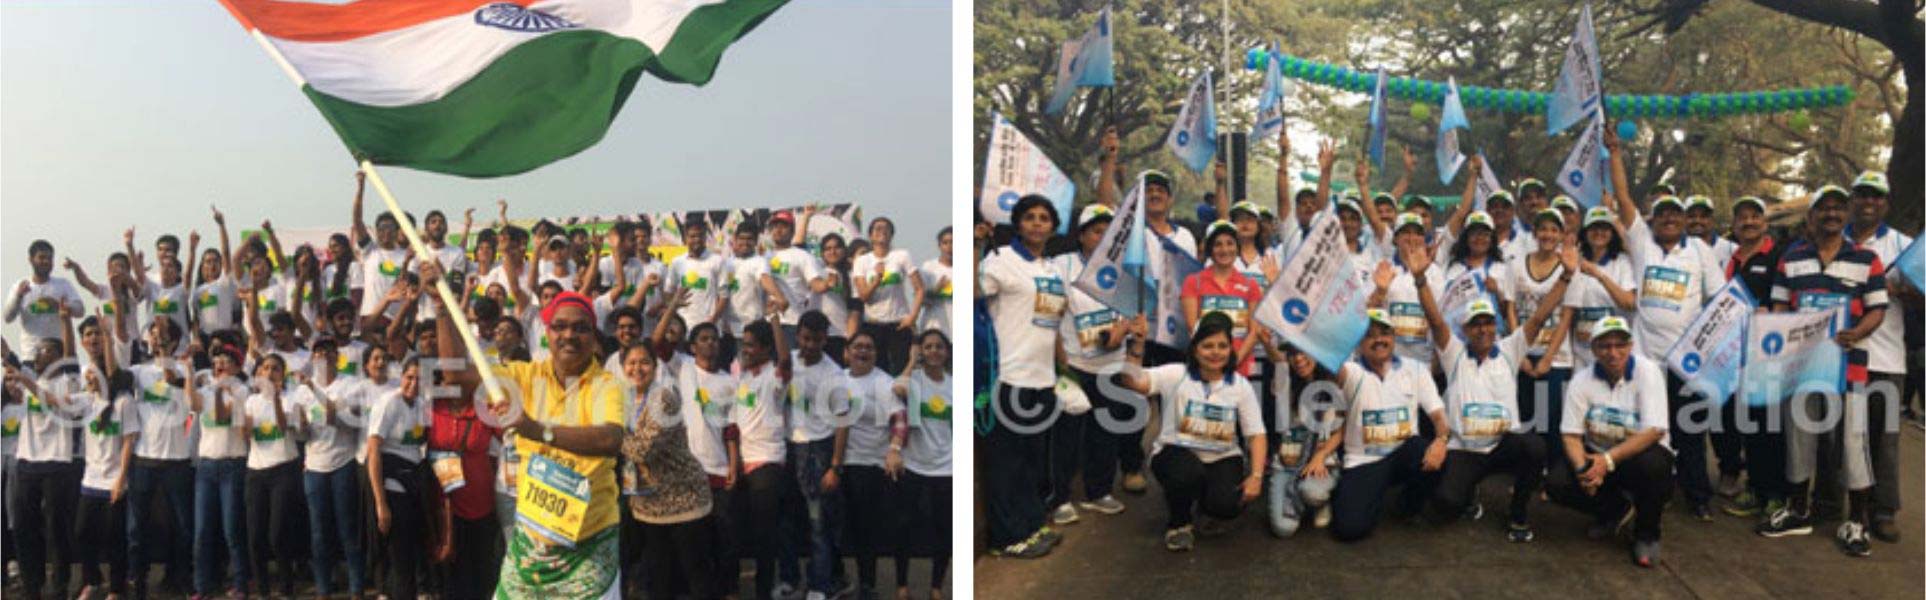 Corporate and Youth run for child education at SCMM 2017